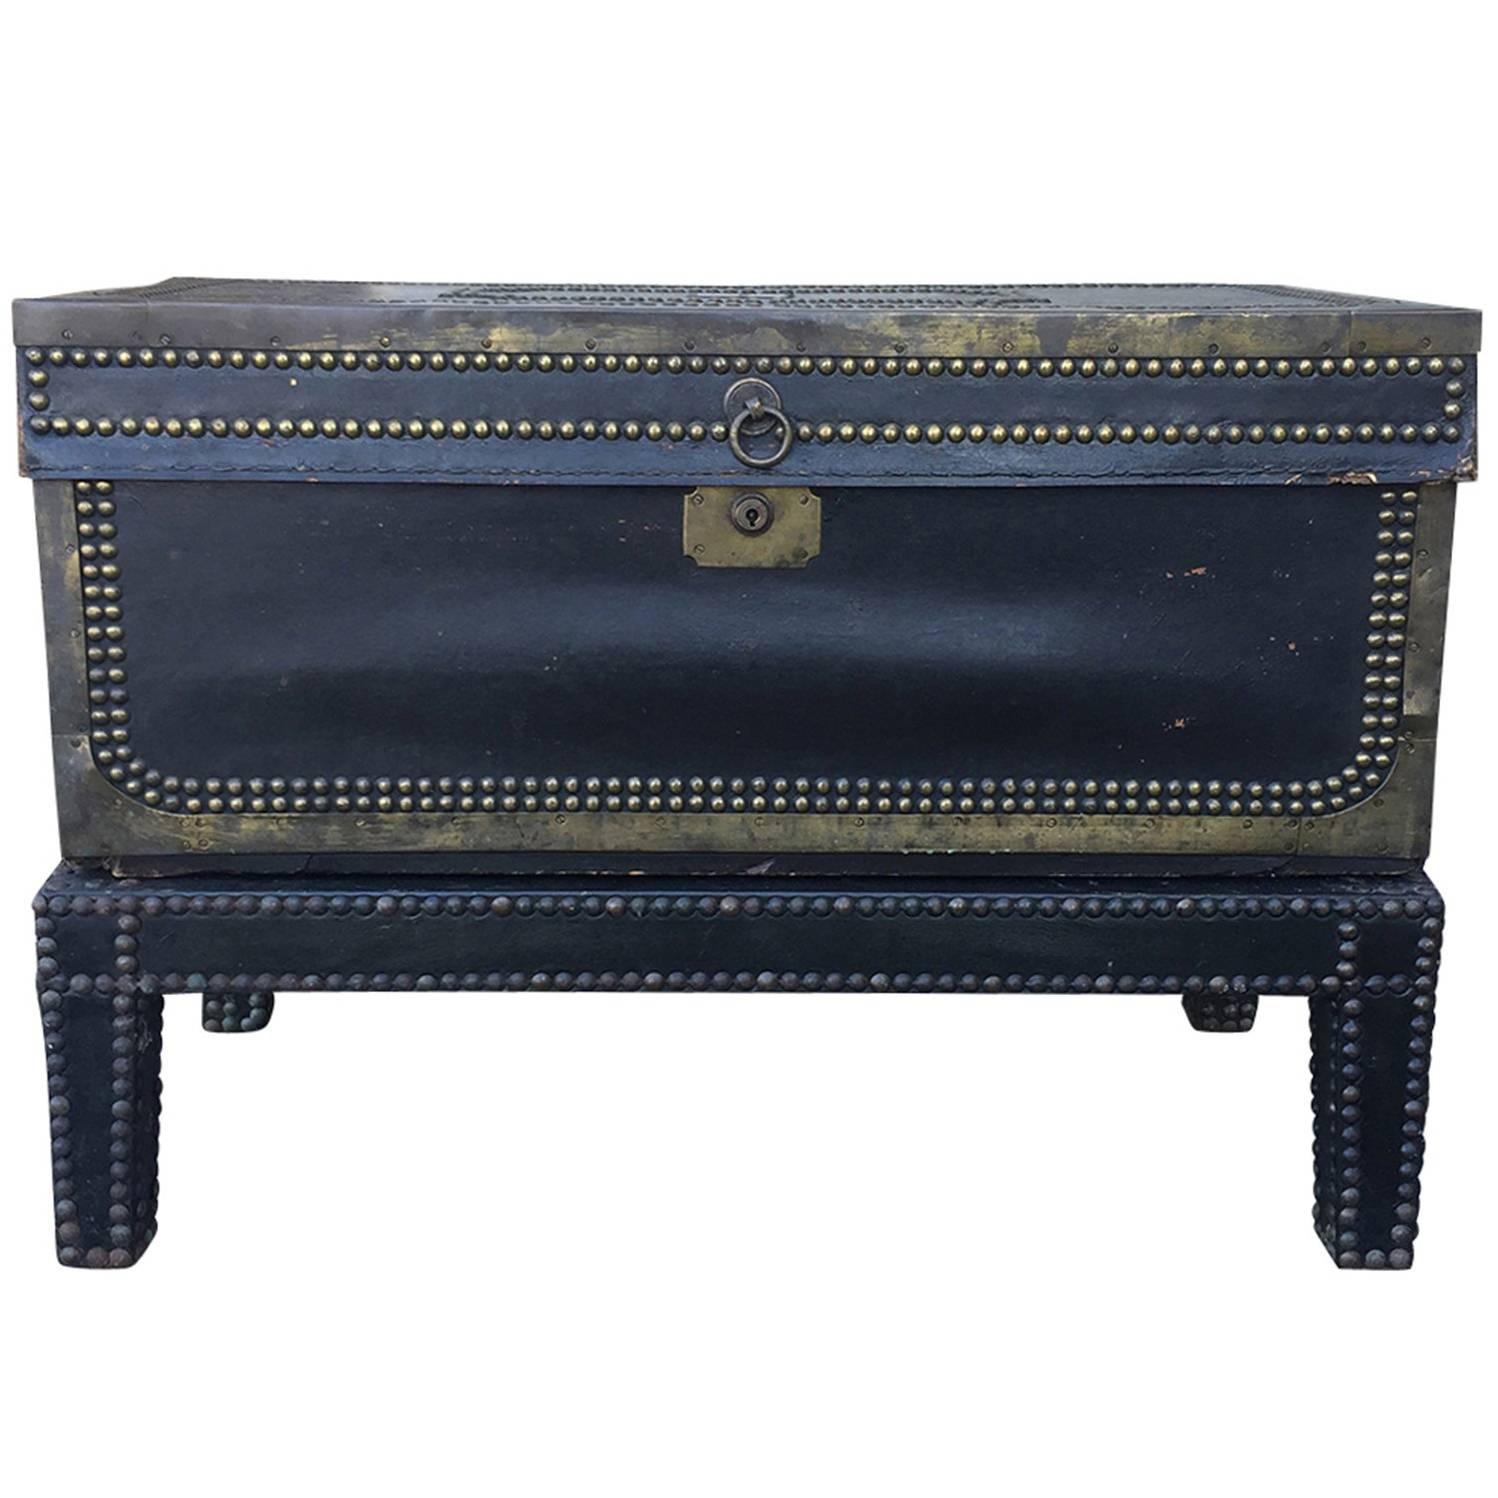 19th Century English Black Leather Trunk on Stand